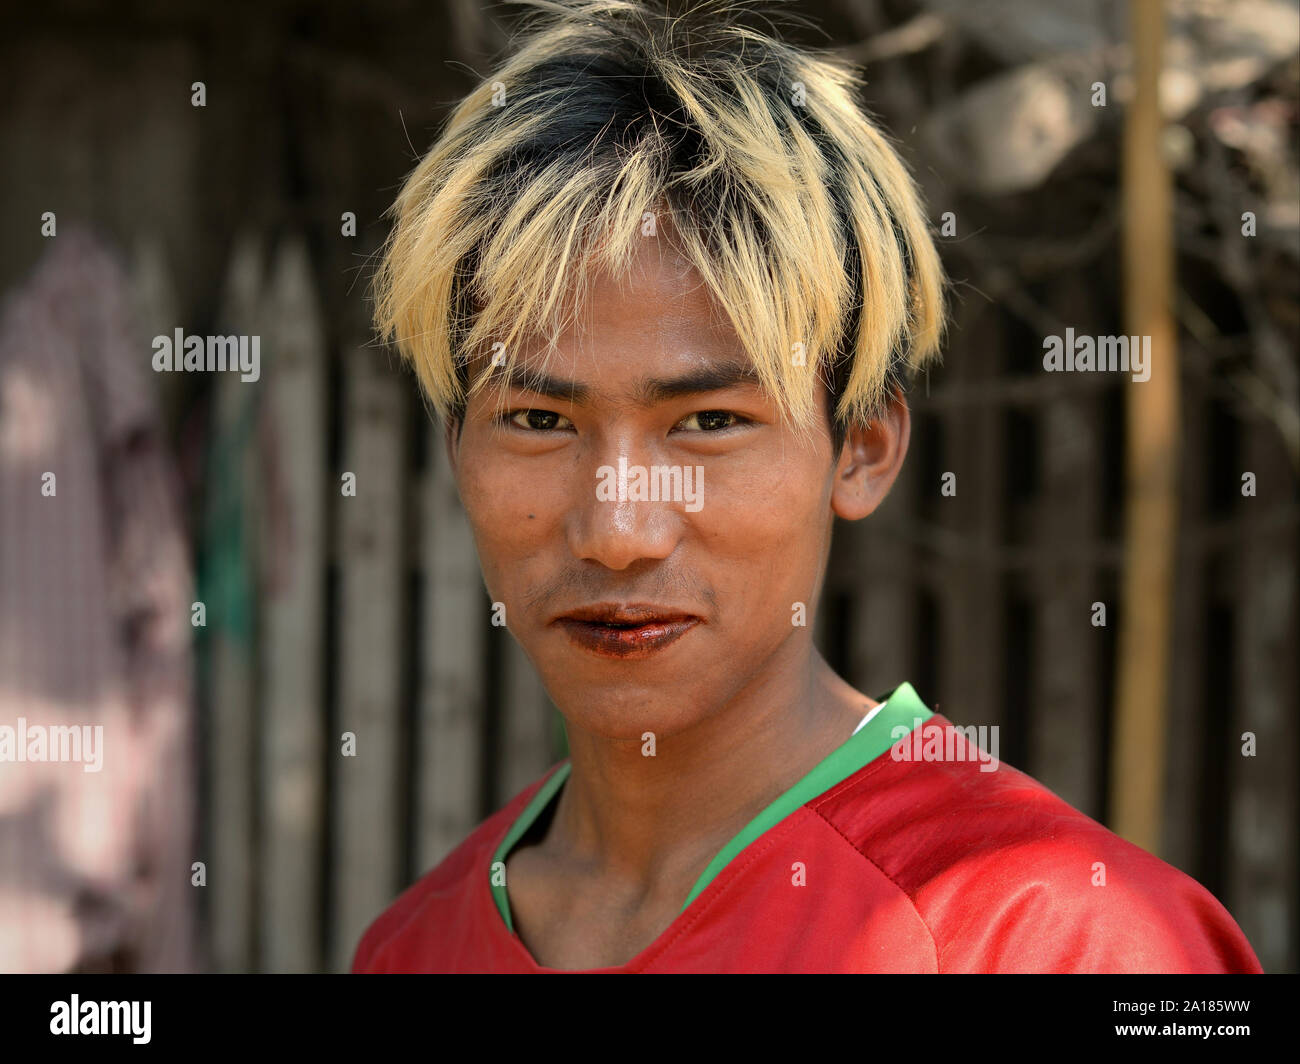 Young Burmese man with blonde-dyed hair and red, betel-stained lips chews a betel quid (betel leaf, areca nut, slaked lime, spices and tobacco). Stock Photo